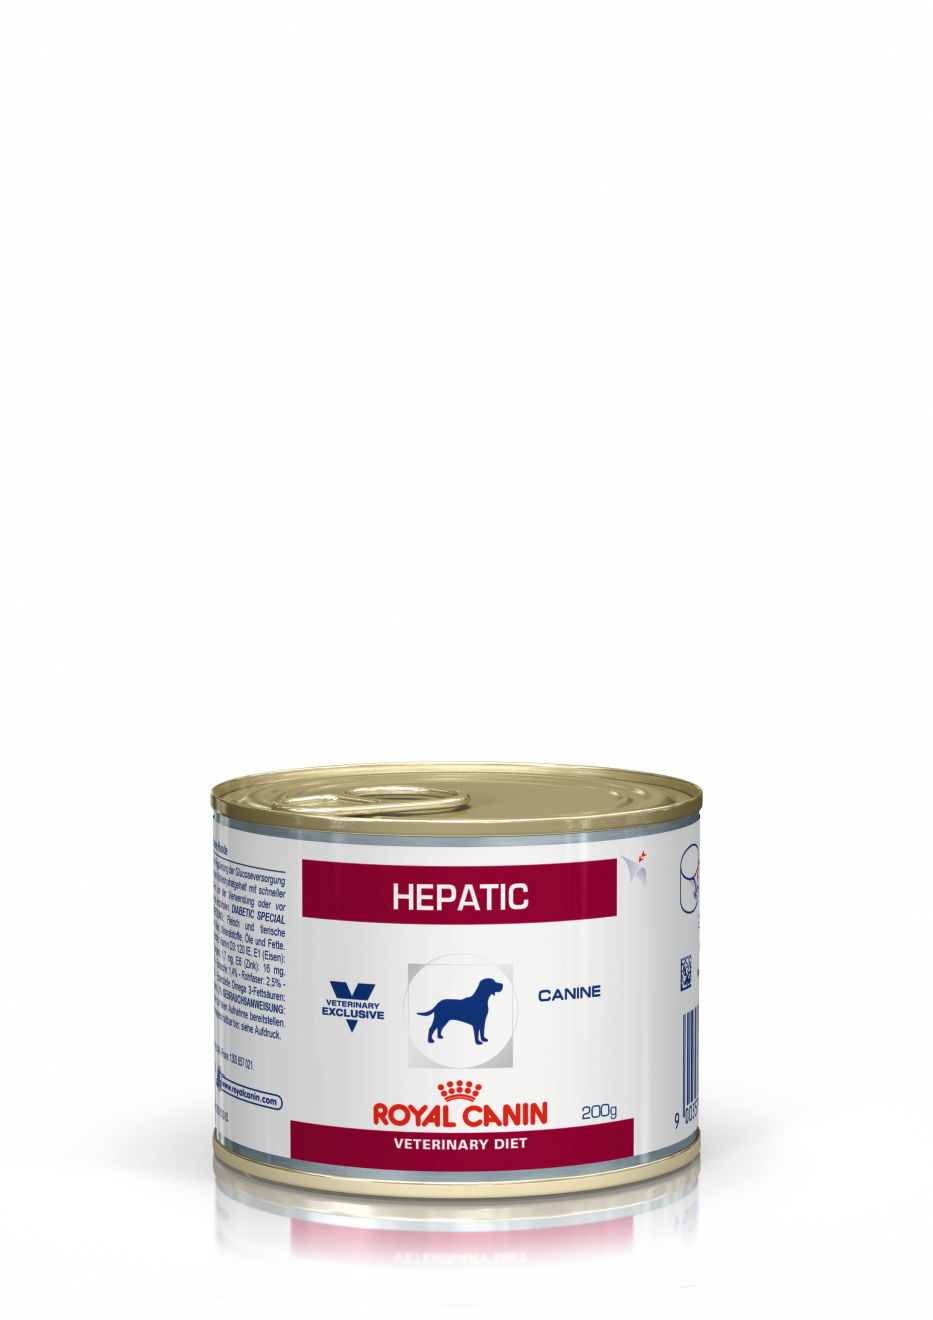 royal canin liver diet for cats